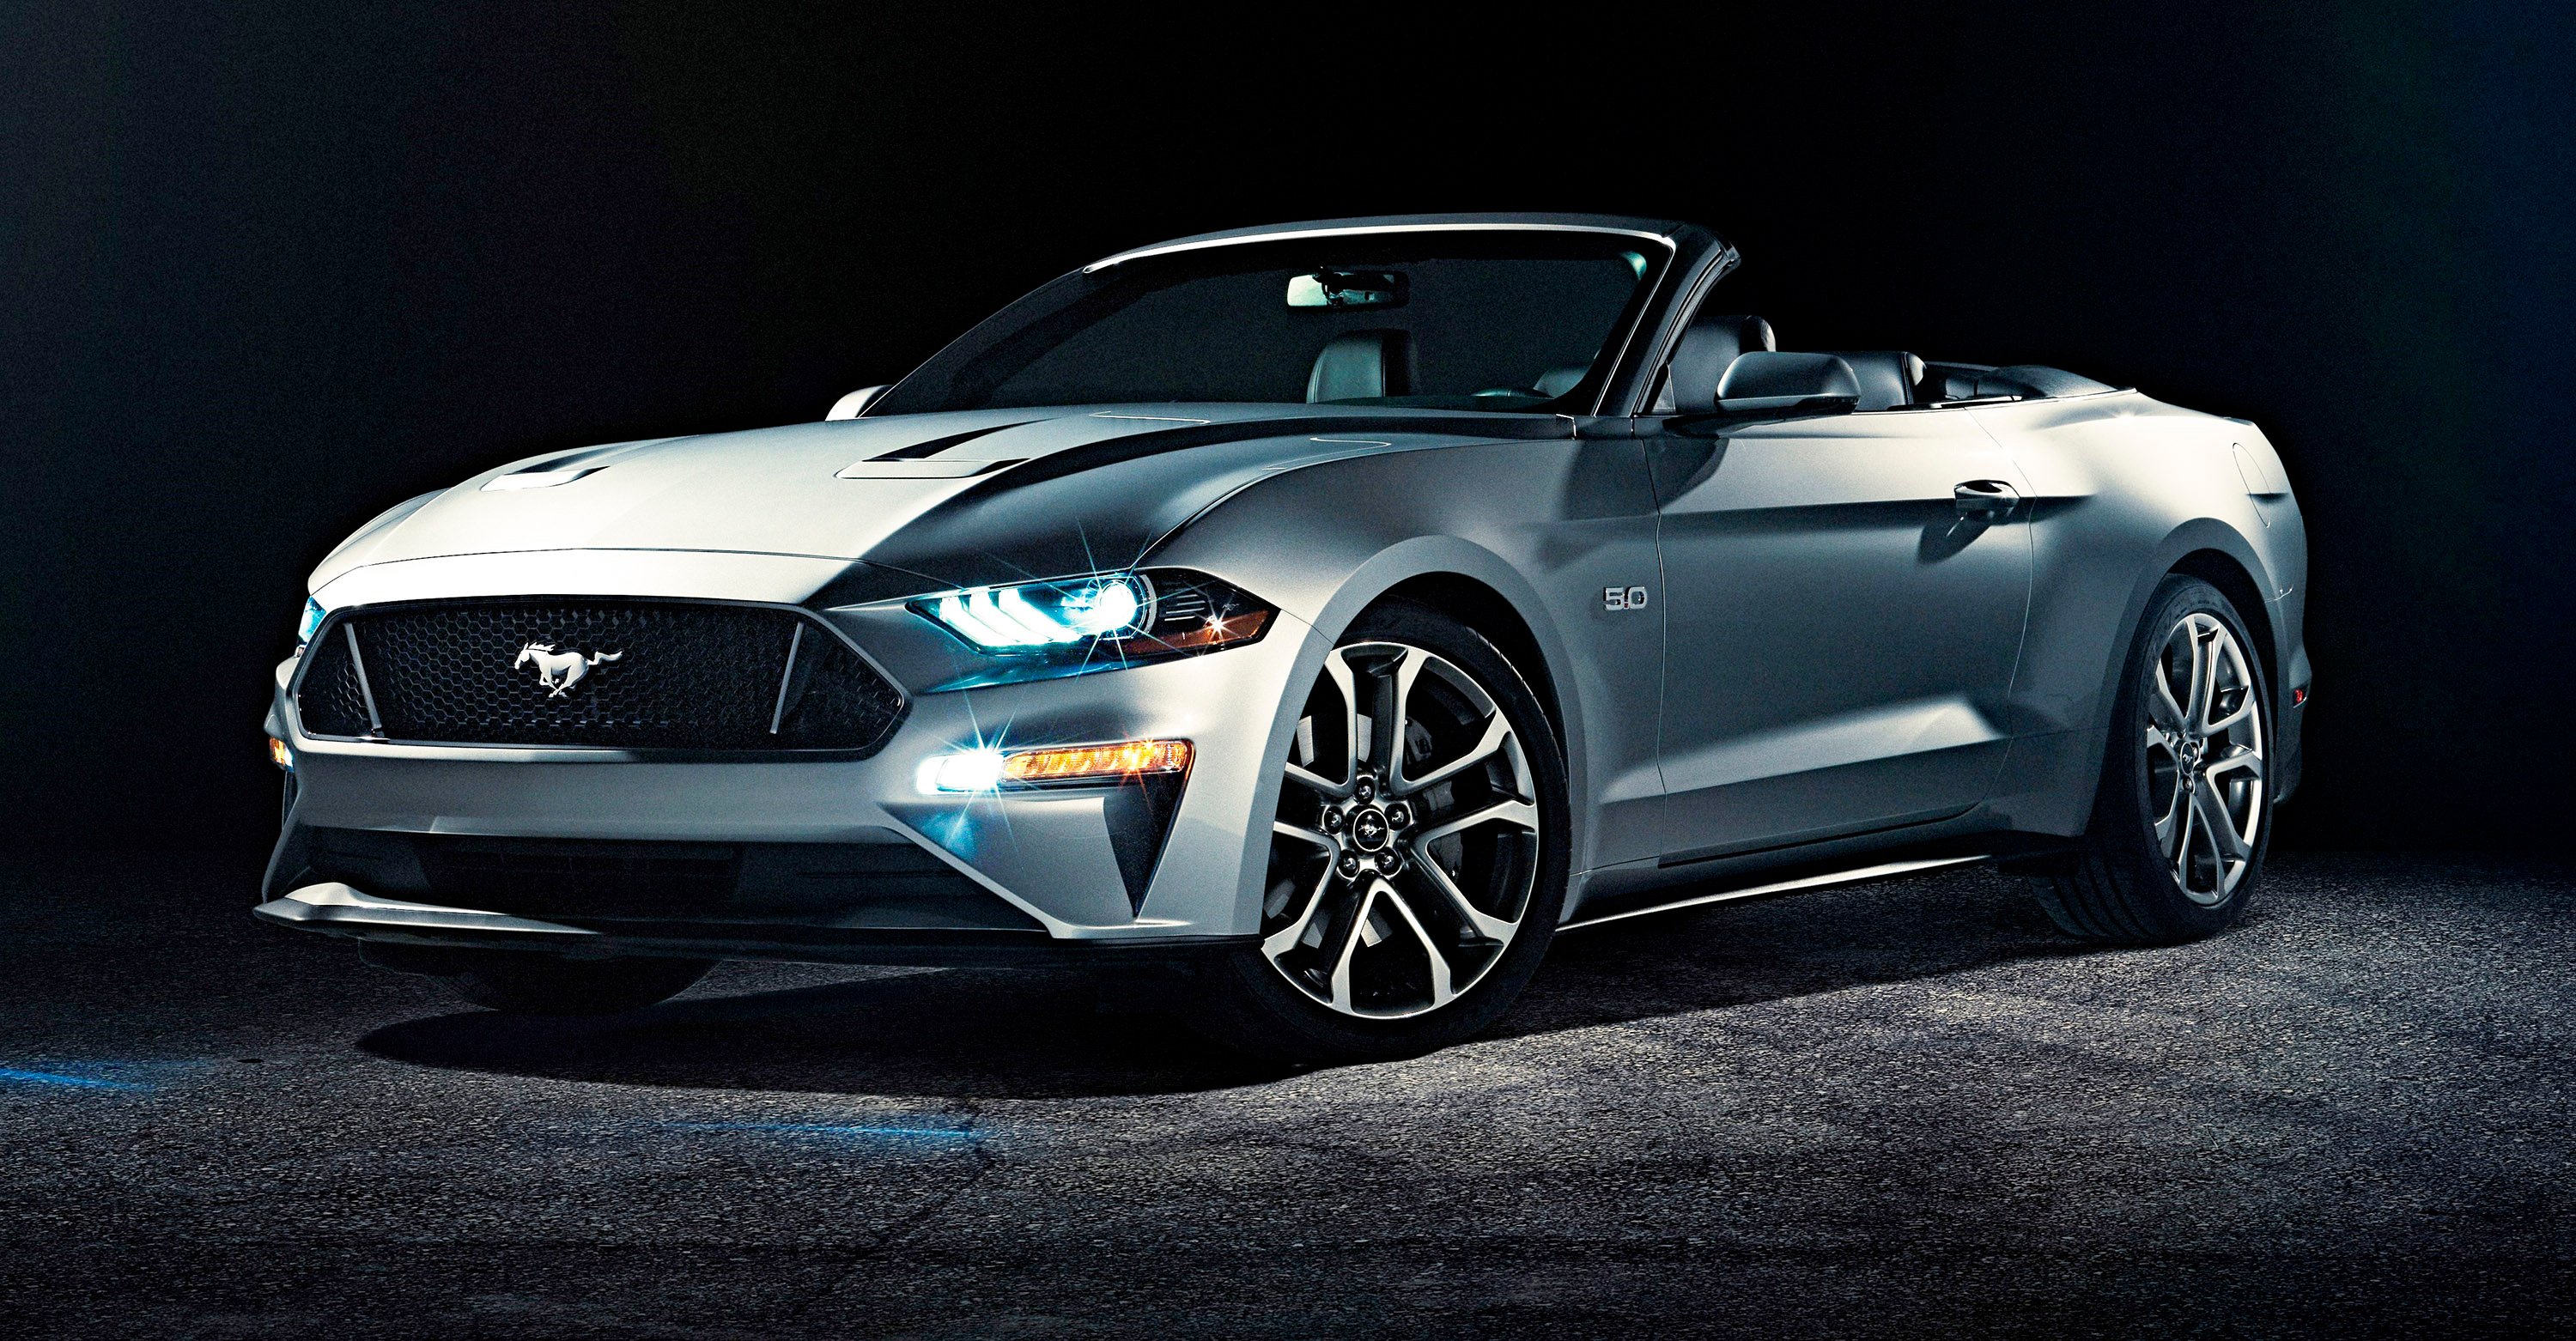 2018 Ford Mustang Convertible revealed - photos | CarAdvice